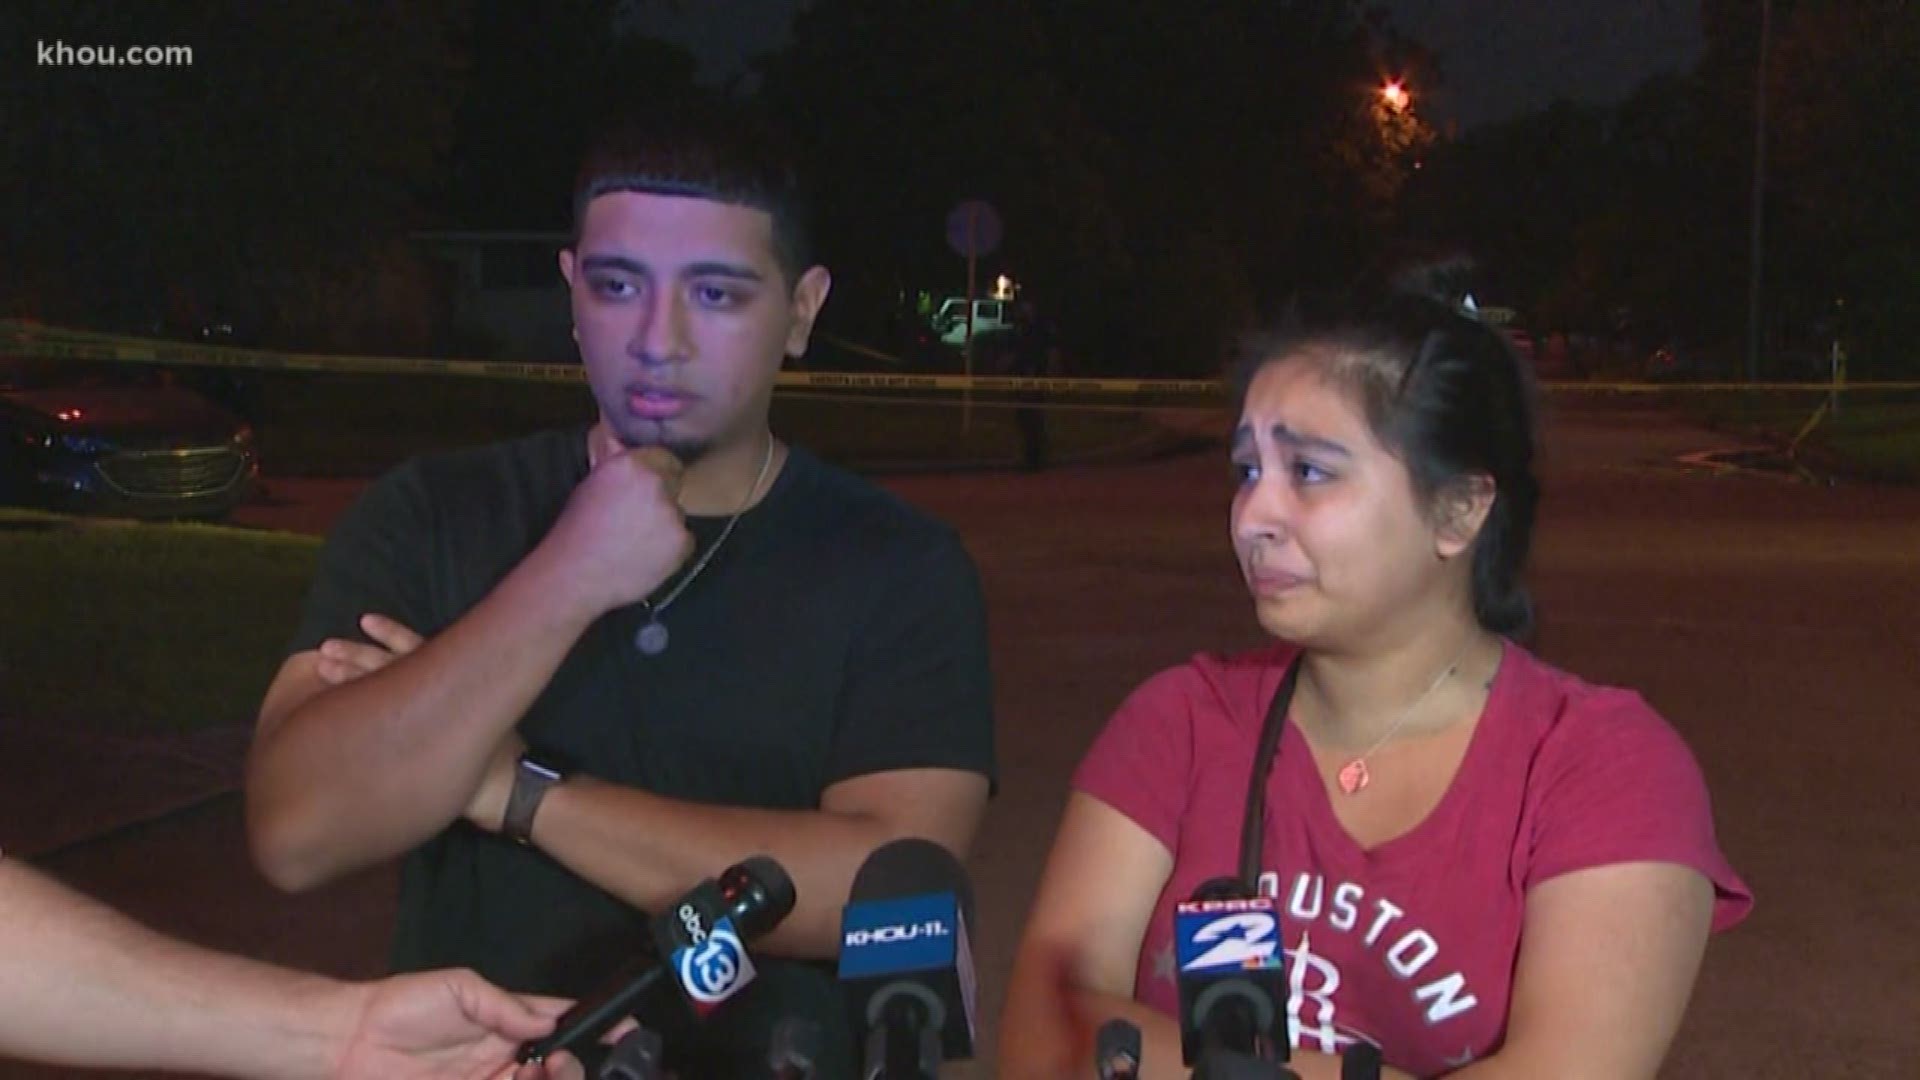 Members of a Houston-area family already planning one funeral are now planning three. Ramiro and Rosalba Reyes were gunned down outside their home overnight.